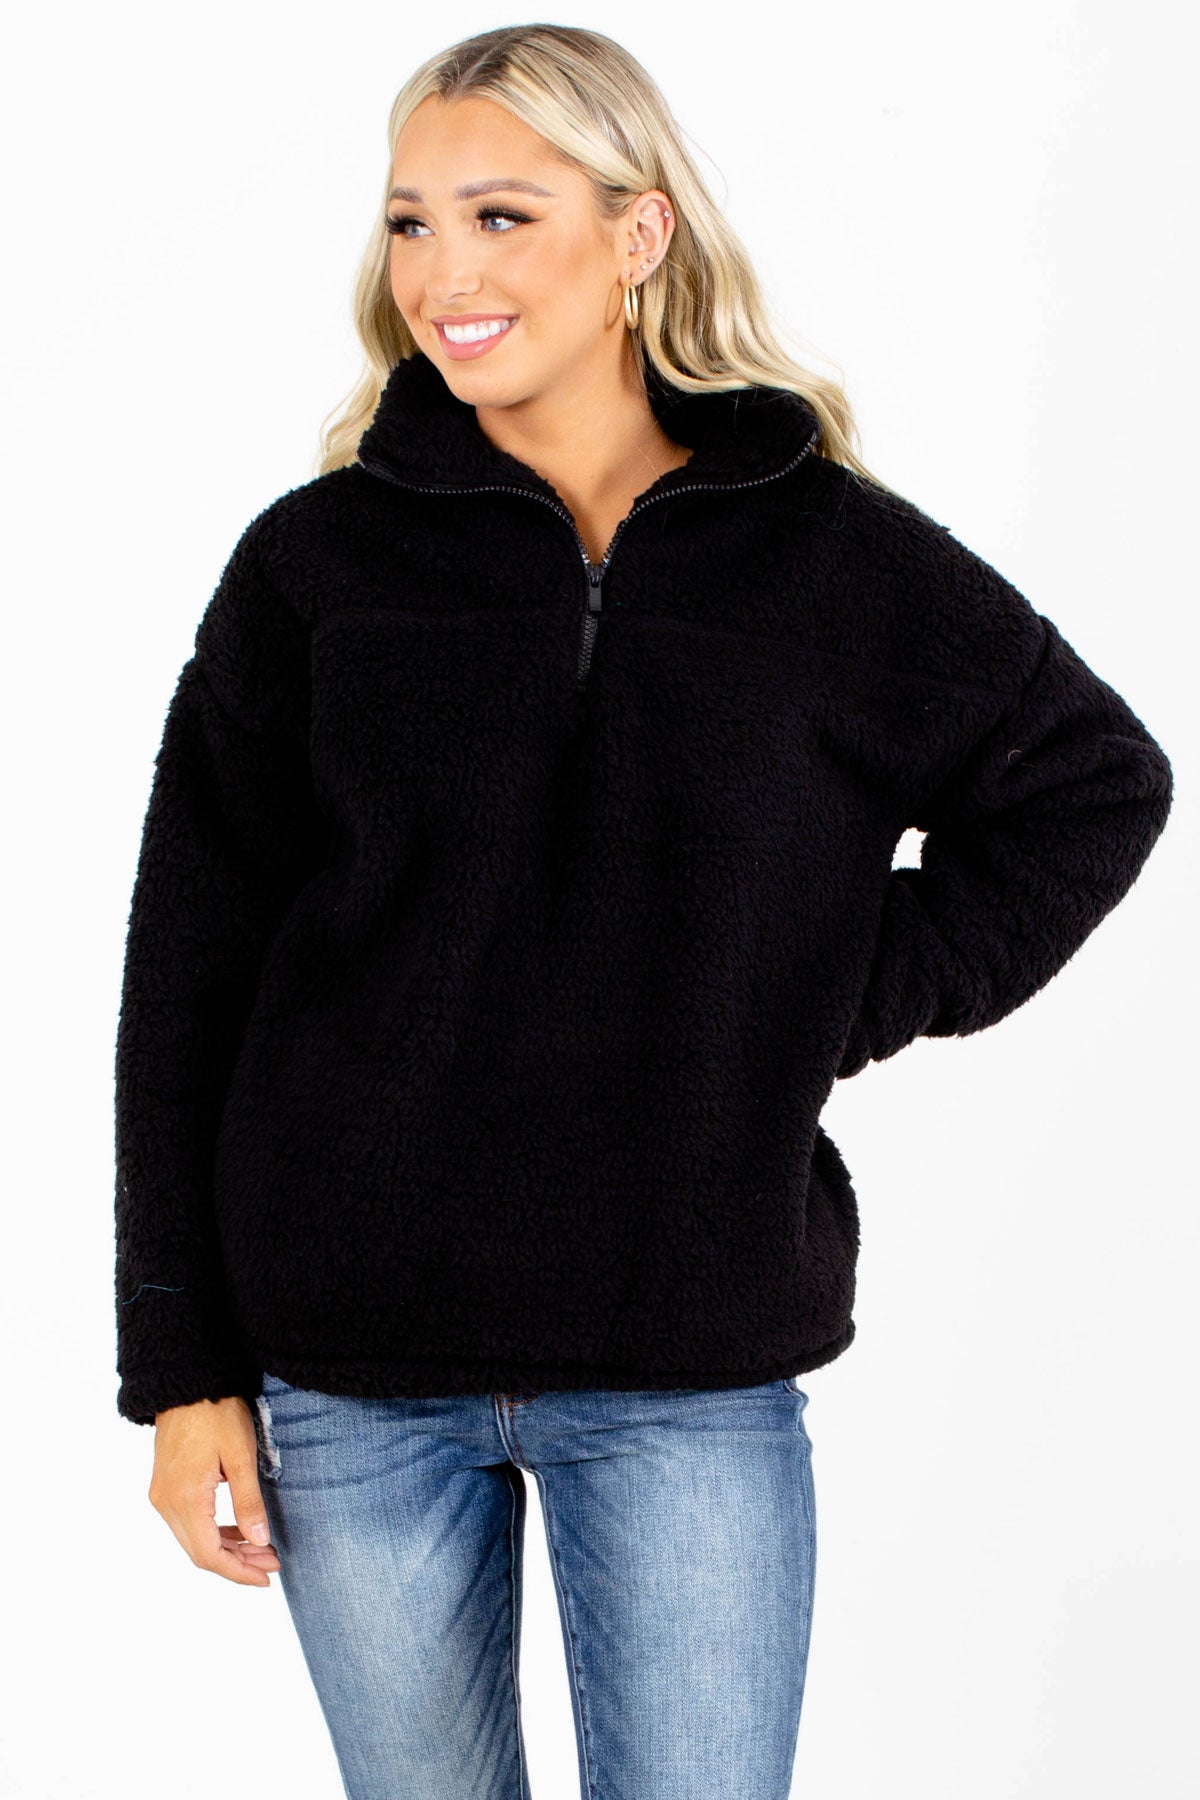 Black Cute and Comfortable Boutique Sherpa Pullovers for Women